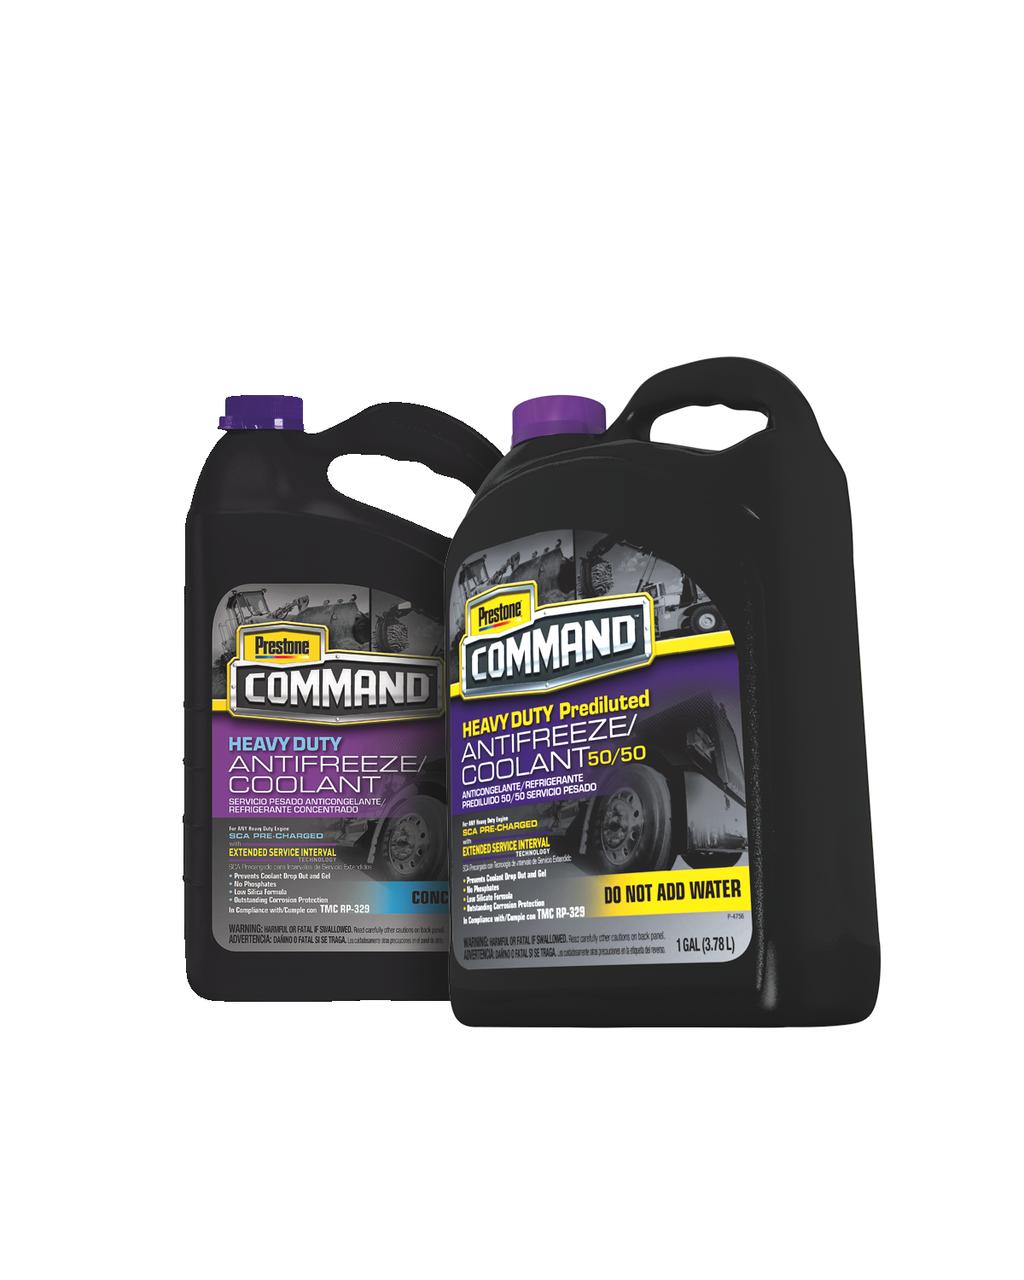 The Prestone Command Diﬀerence Prestone Command Heavy Duty Coolant SCA Pre- Charged Prestone Command Heavy Duty An2freeze Coolant is a blend of Ethylene glycol and specially formulated inhibitor